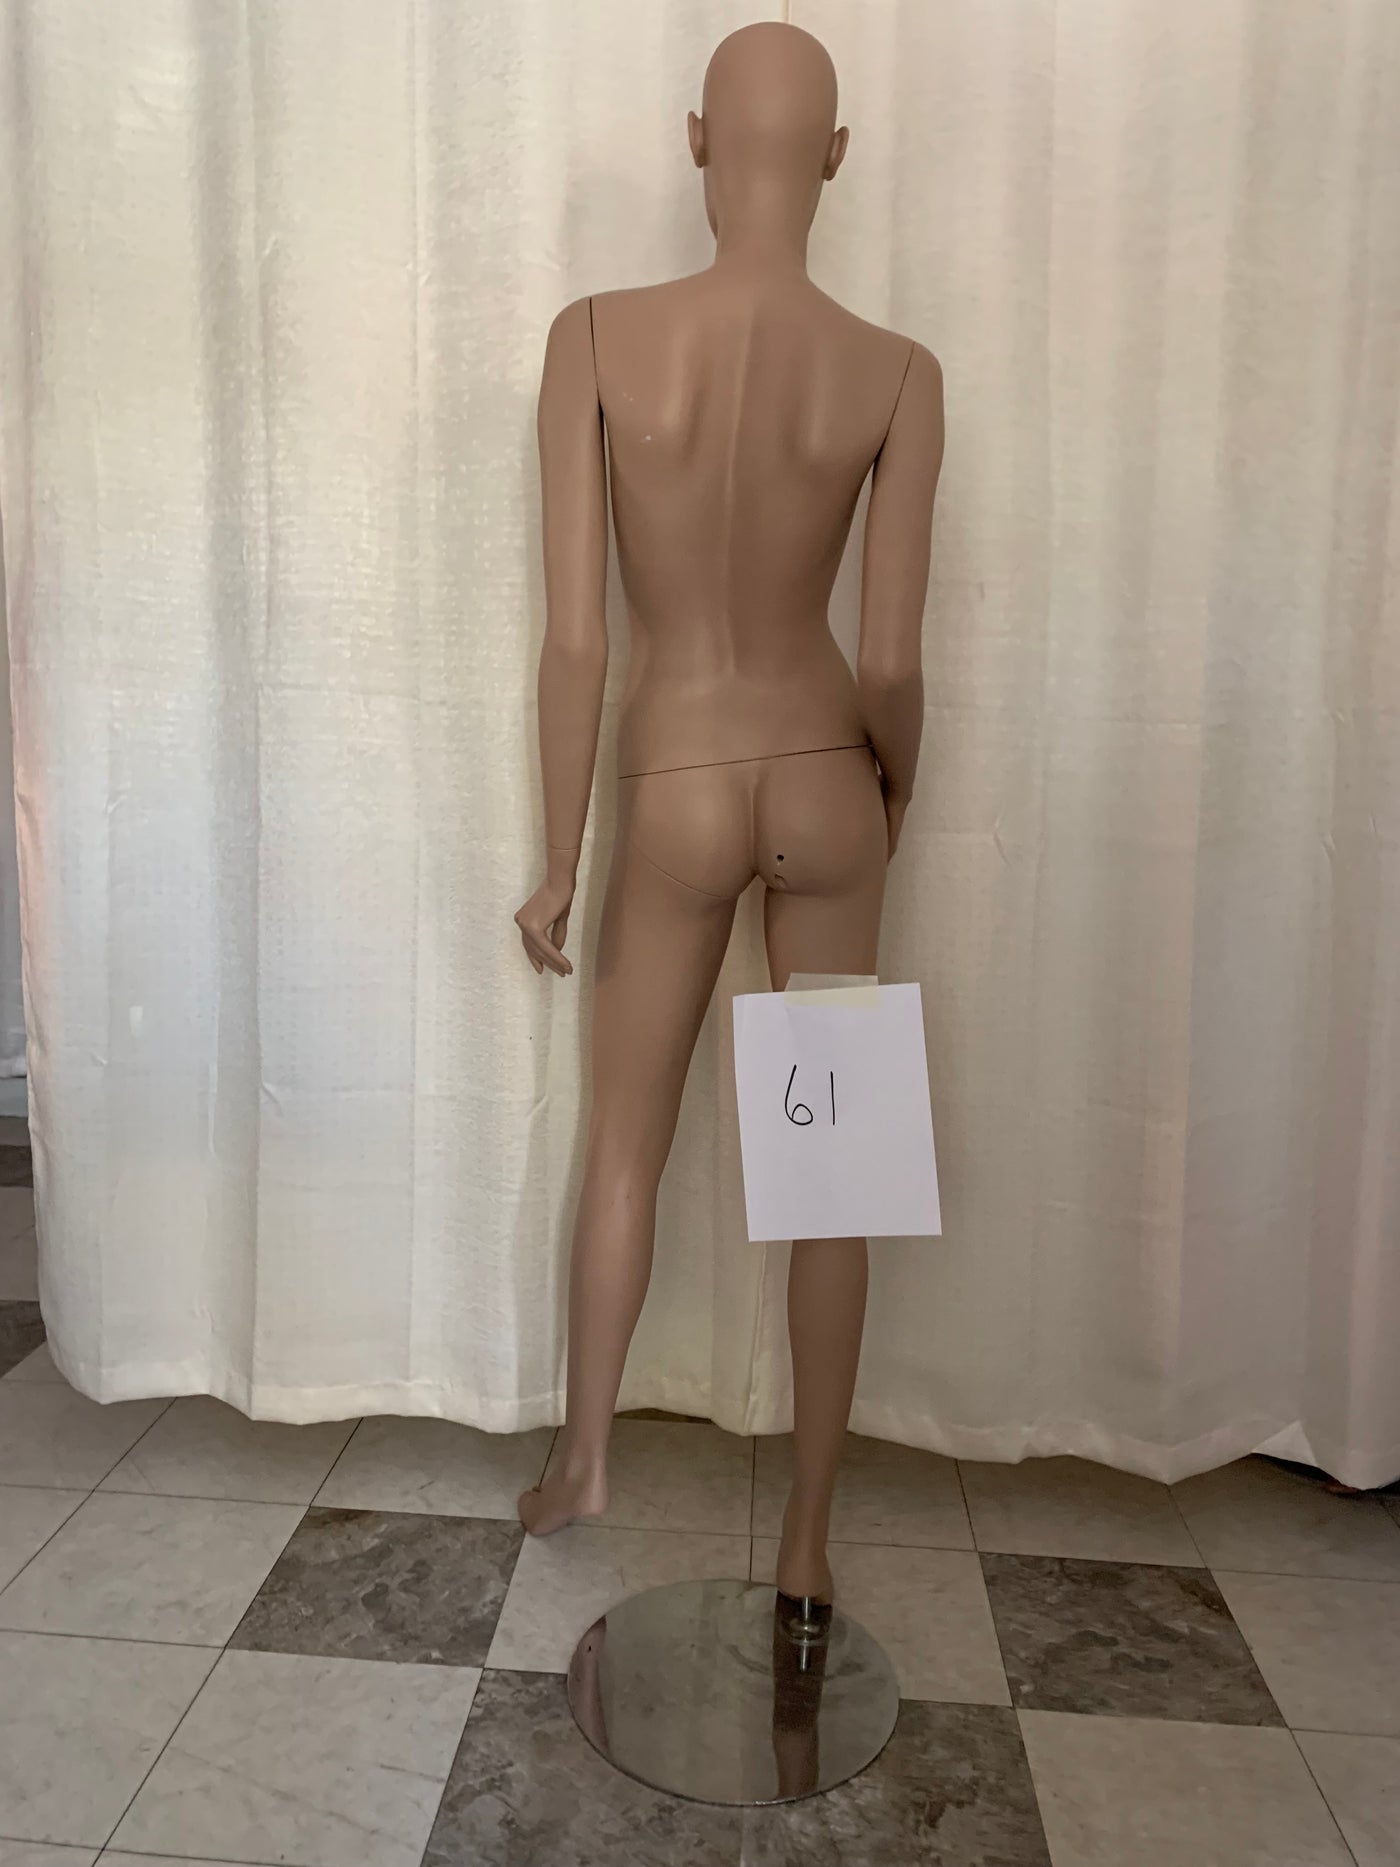 Used Female  Adel Rootstein Mannequin  #61 -Girl Thing